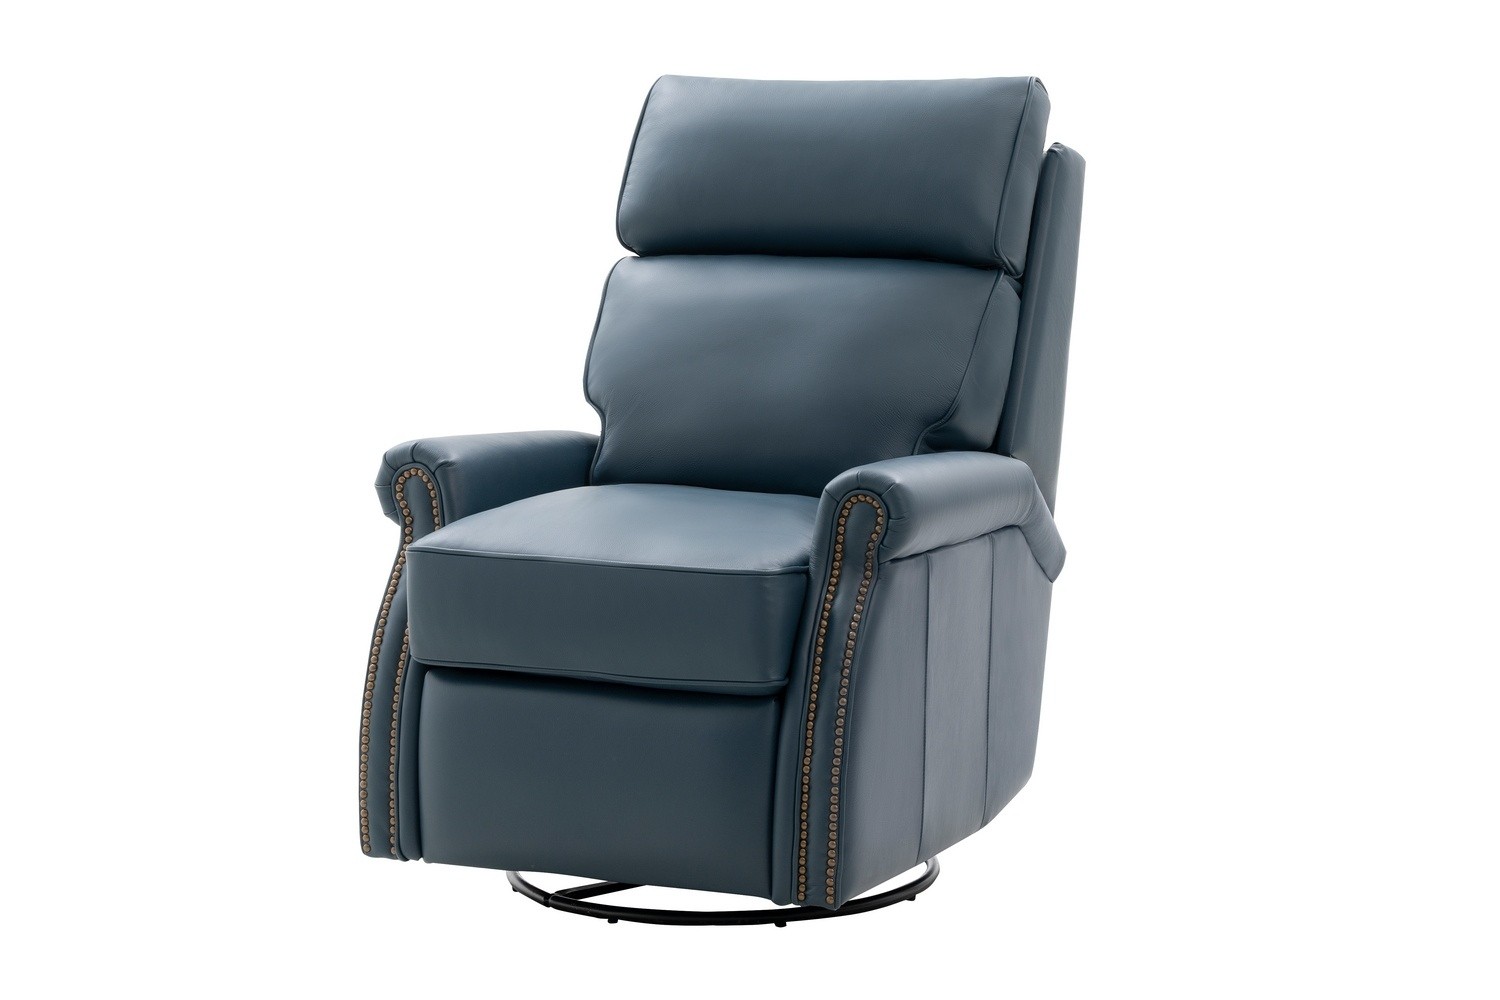 Barcalounger Crews Swivel Glider Recliner Chair - Prestin Yale Blue/All Leather